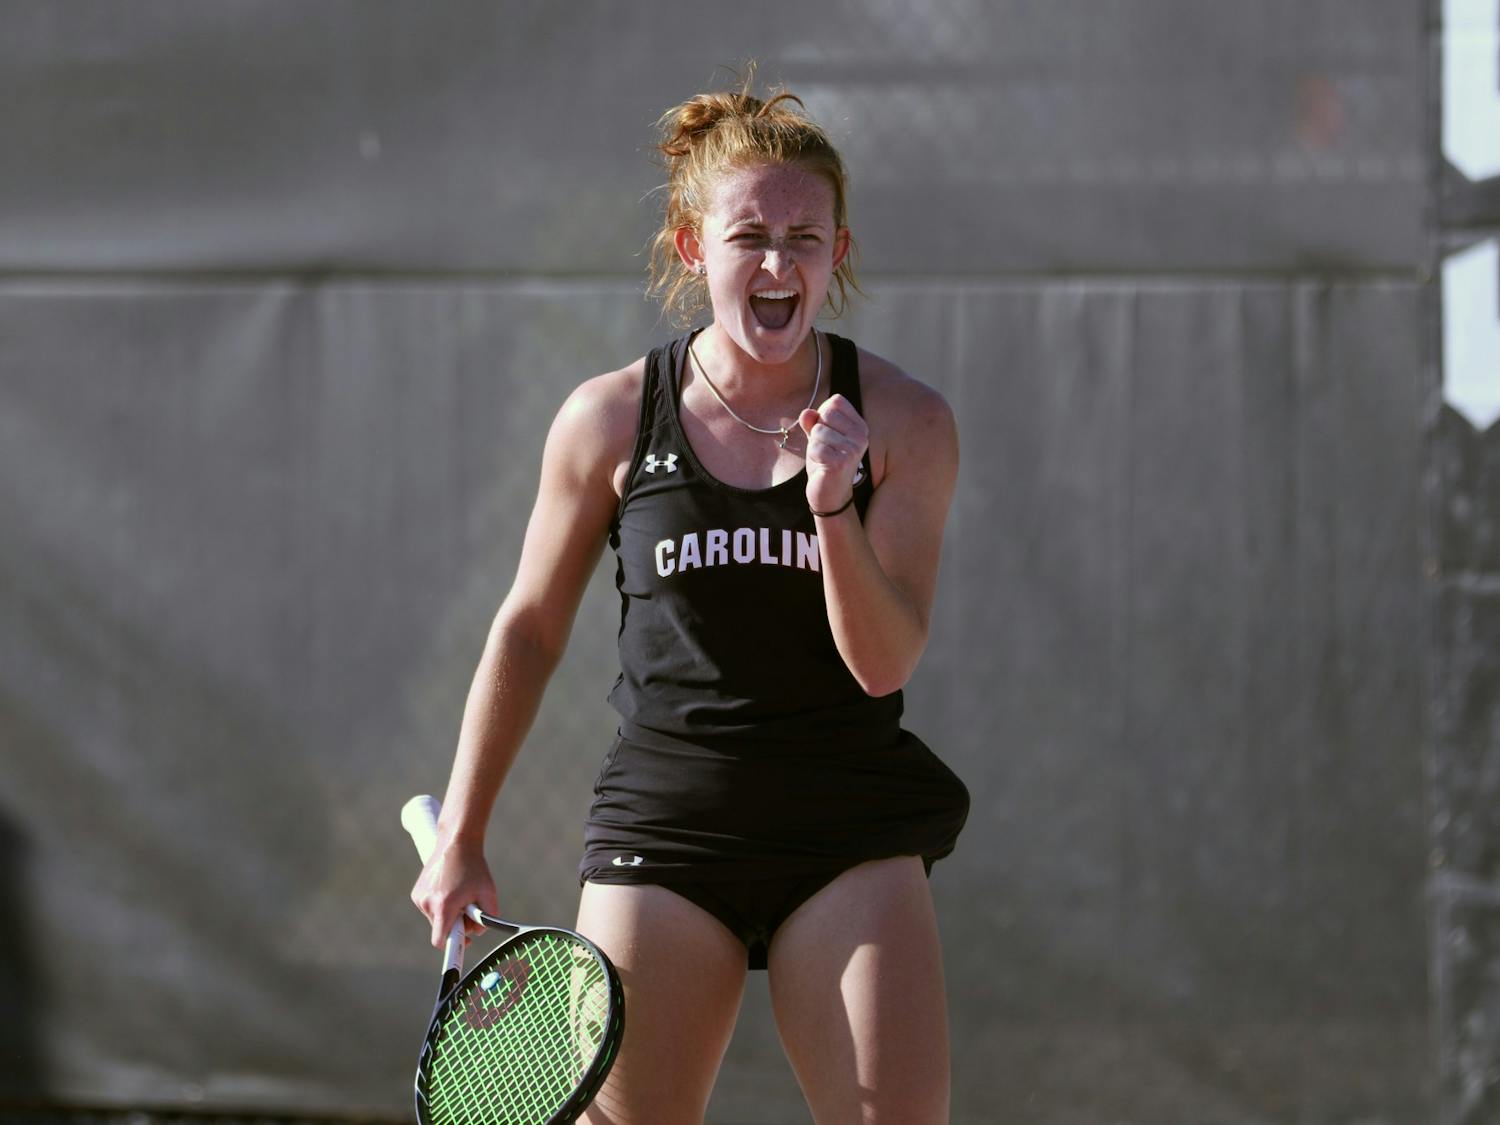 South Carolina junior Megan Davies celebrates her victory after defeating her Clemson opponent 6-3, 6-2 on Jan. 30, 2020. Overall, the Gamecocks beat Clemson 6-1.